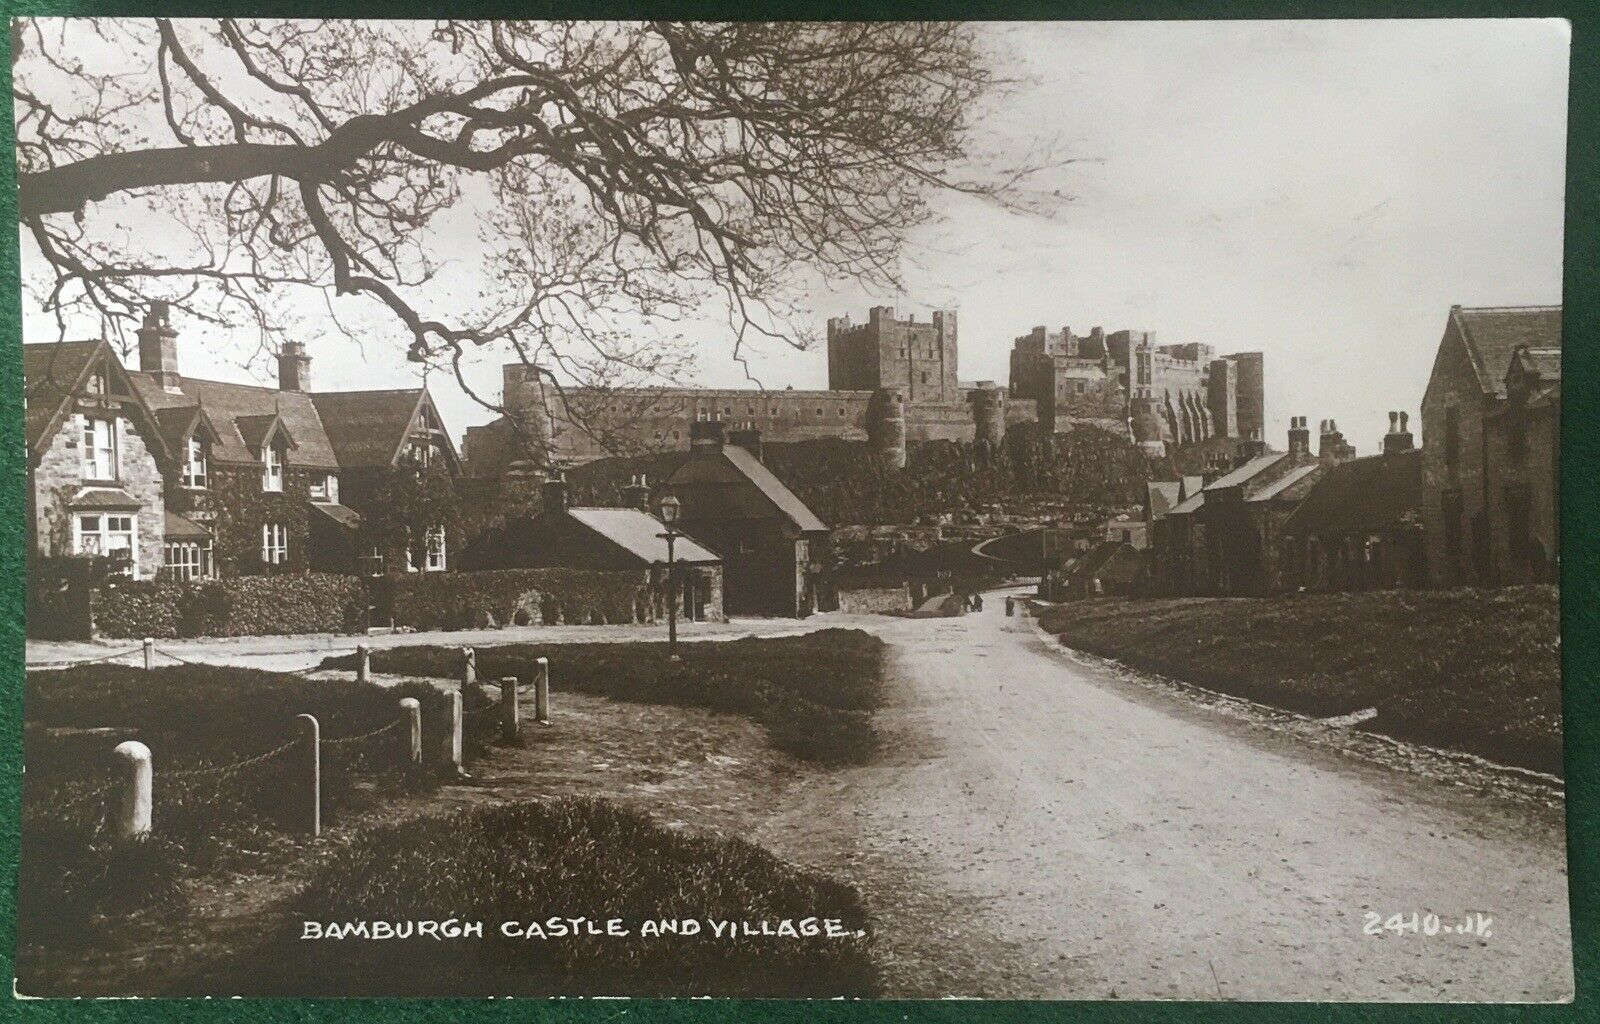 House Clearance - Banburgh Castle And Village. Real Photocard By Vallentine.c1915